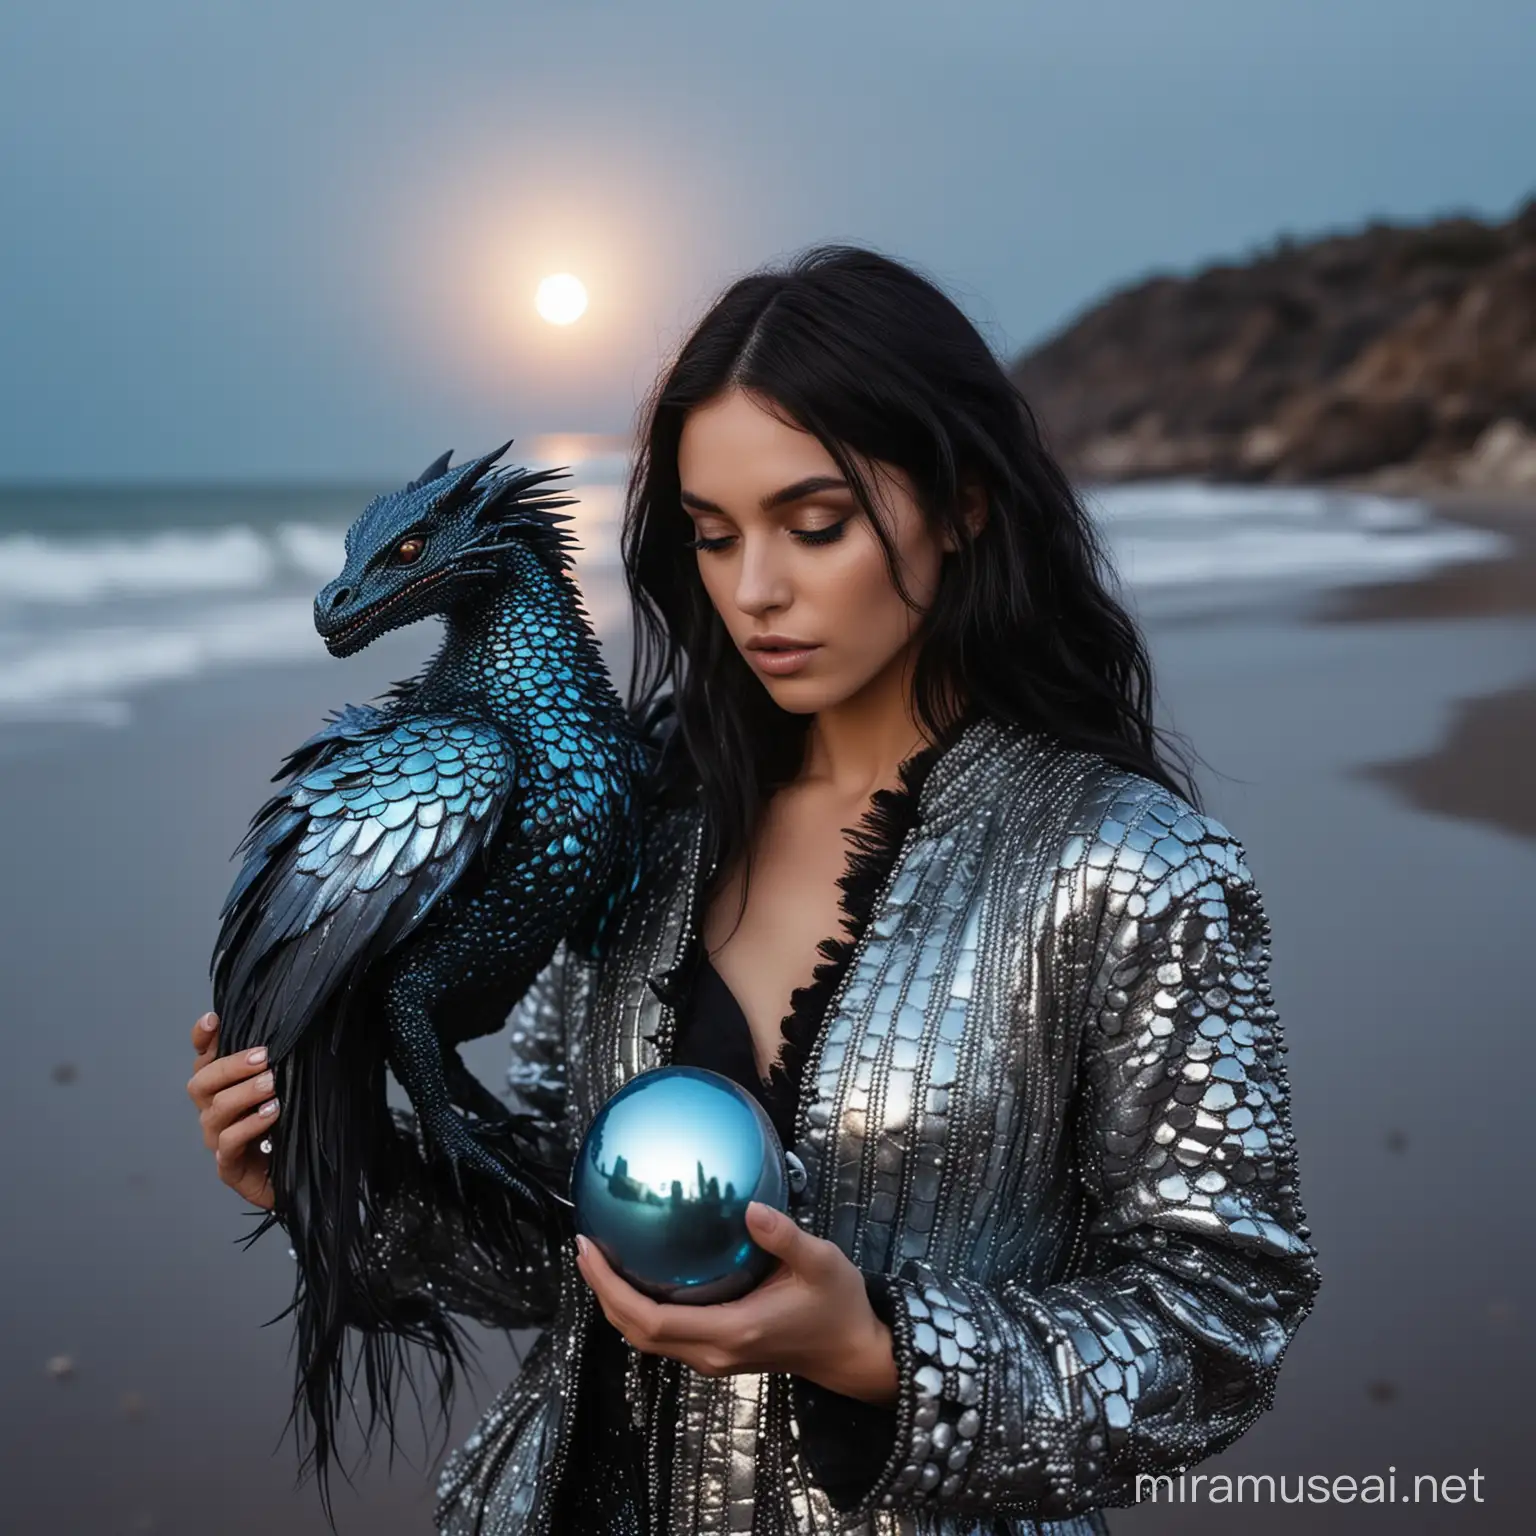 A gorgeous woman model holding a metallic black blue colored tiny dragon inside silver eggshell, pearl iridescent colors, wearing metallic black shiny Schiapirelli inspired couture feather jacket, silver shiny crone, water are extreme long black hair, wes anderson color palette, dark night neon glowing  with gigantic moon beach background, 35mm photography